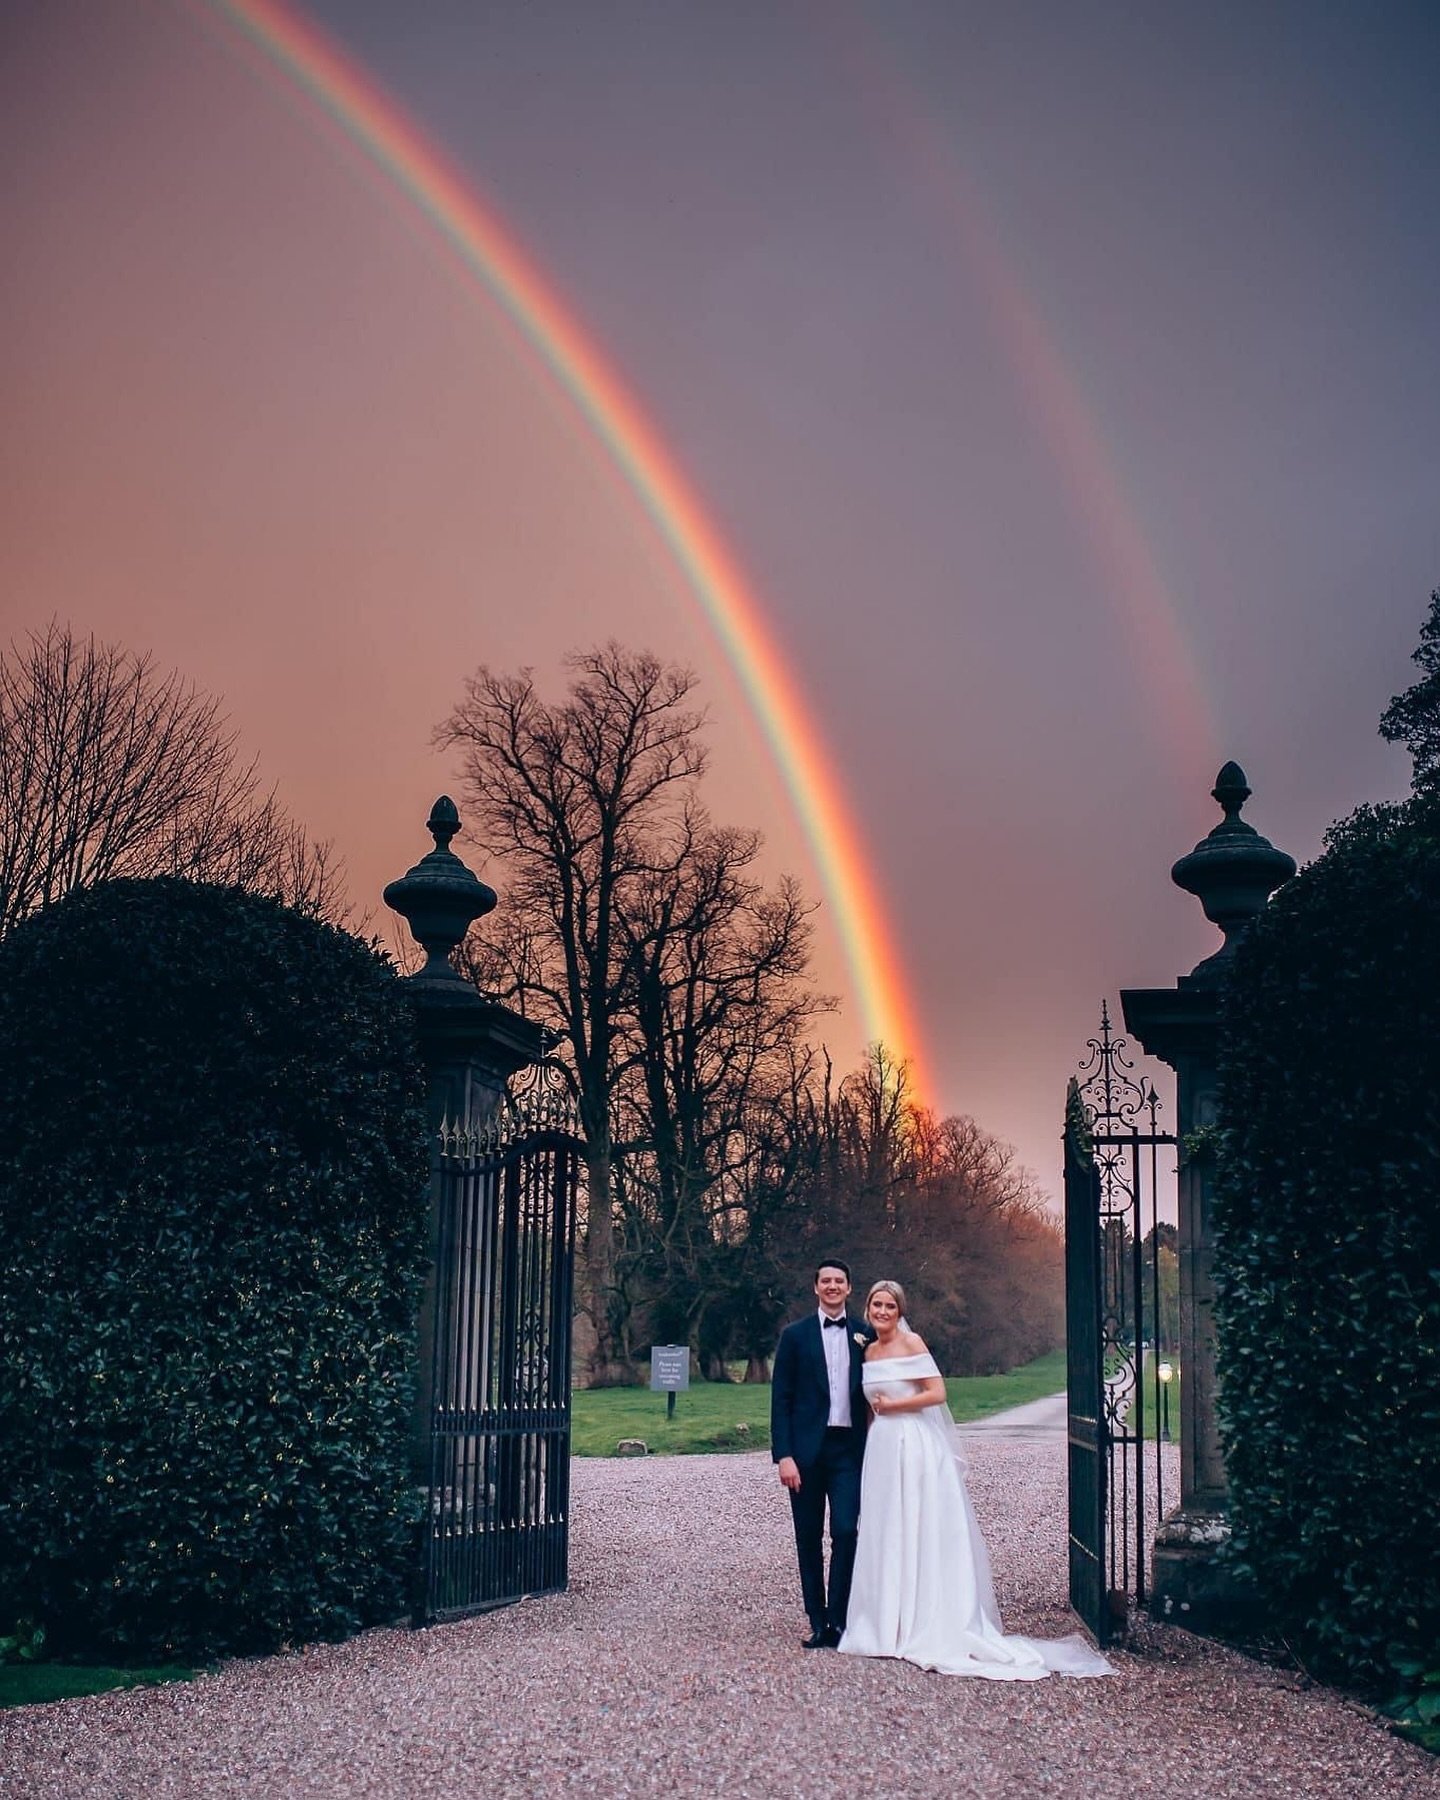 🌈 Two years since I ran faster than the actual wind to catch this epic rainbow 🌈

I can&rsquo;t wait to get back to @soughton_hall this year! 
And while I can&rsquo;t promise incredible skies like this, I can promise that it really is the most magi